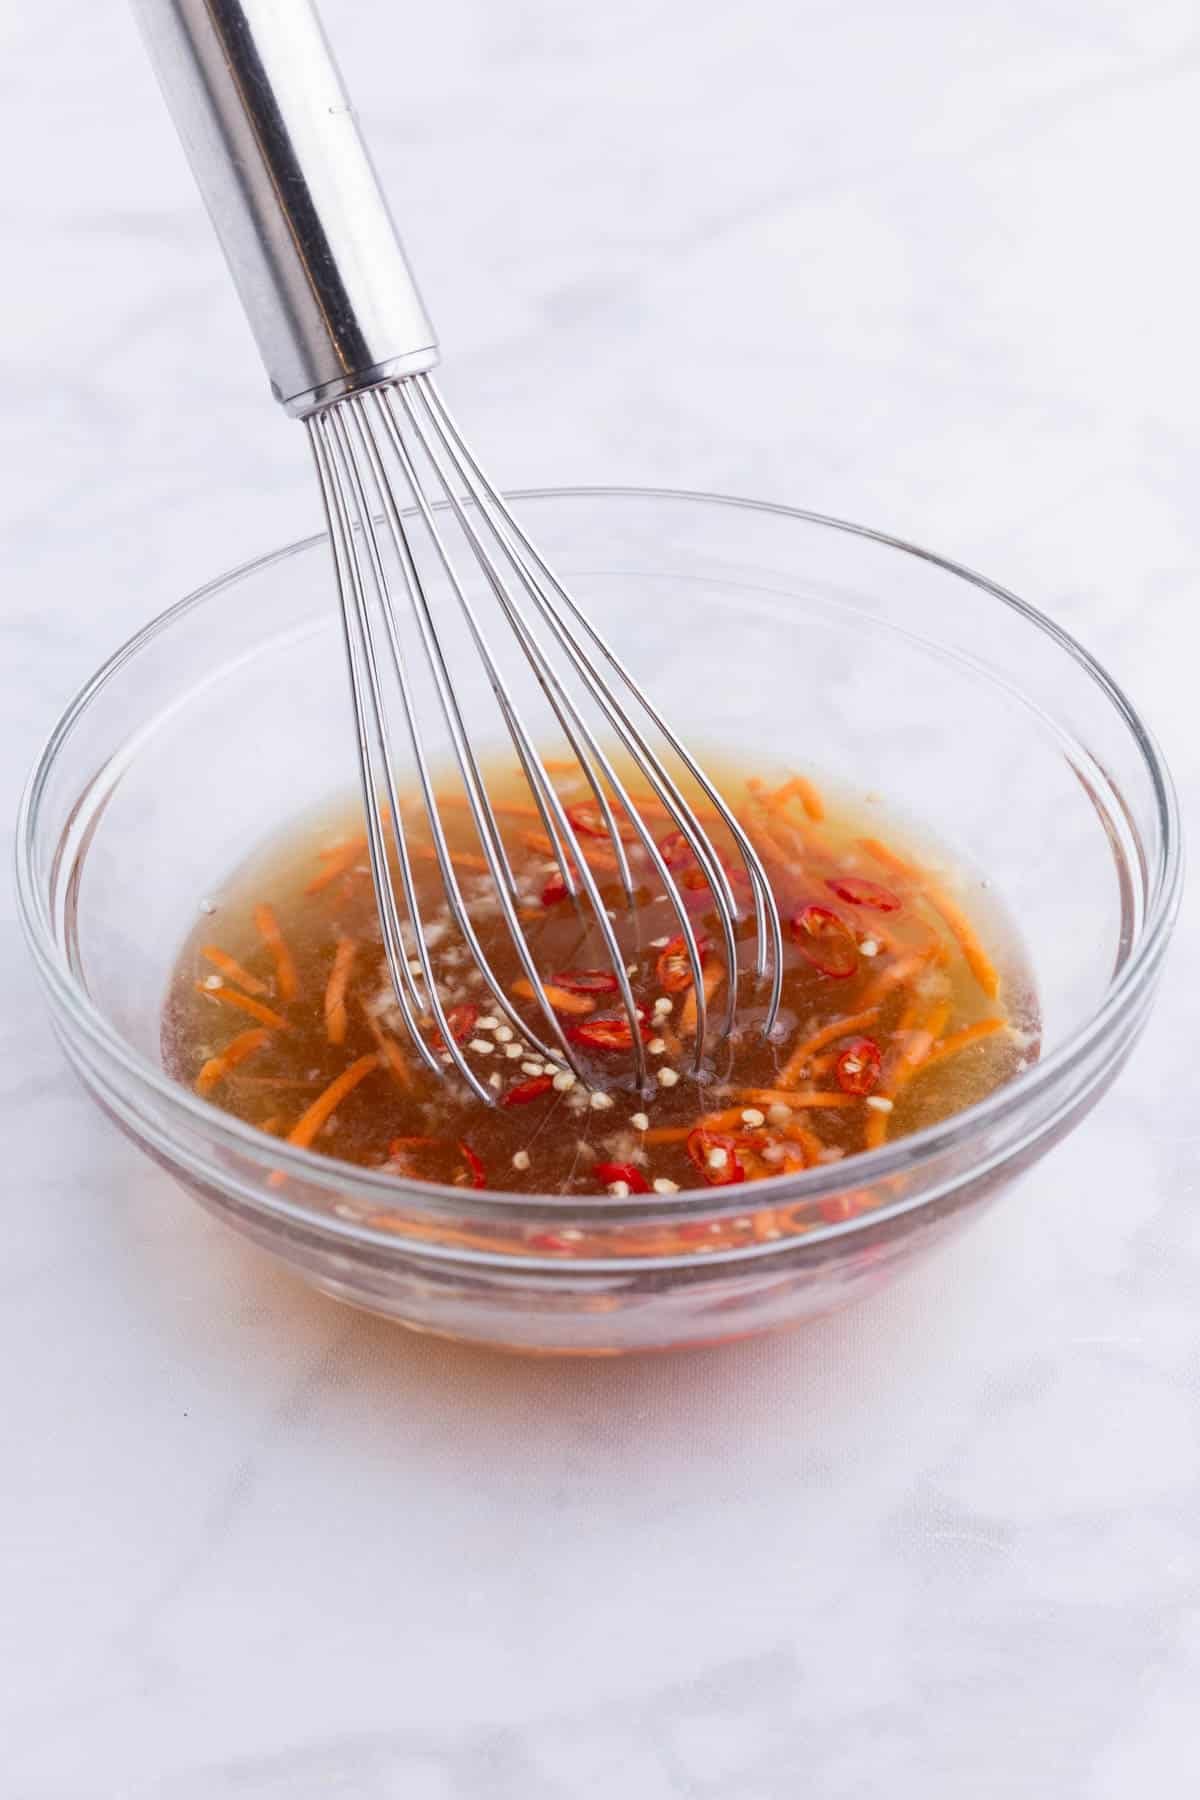 Fish sauce ingredients are whisked together.